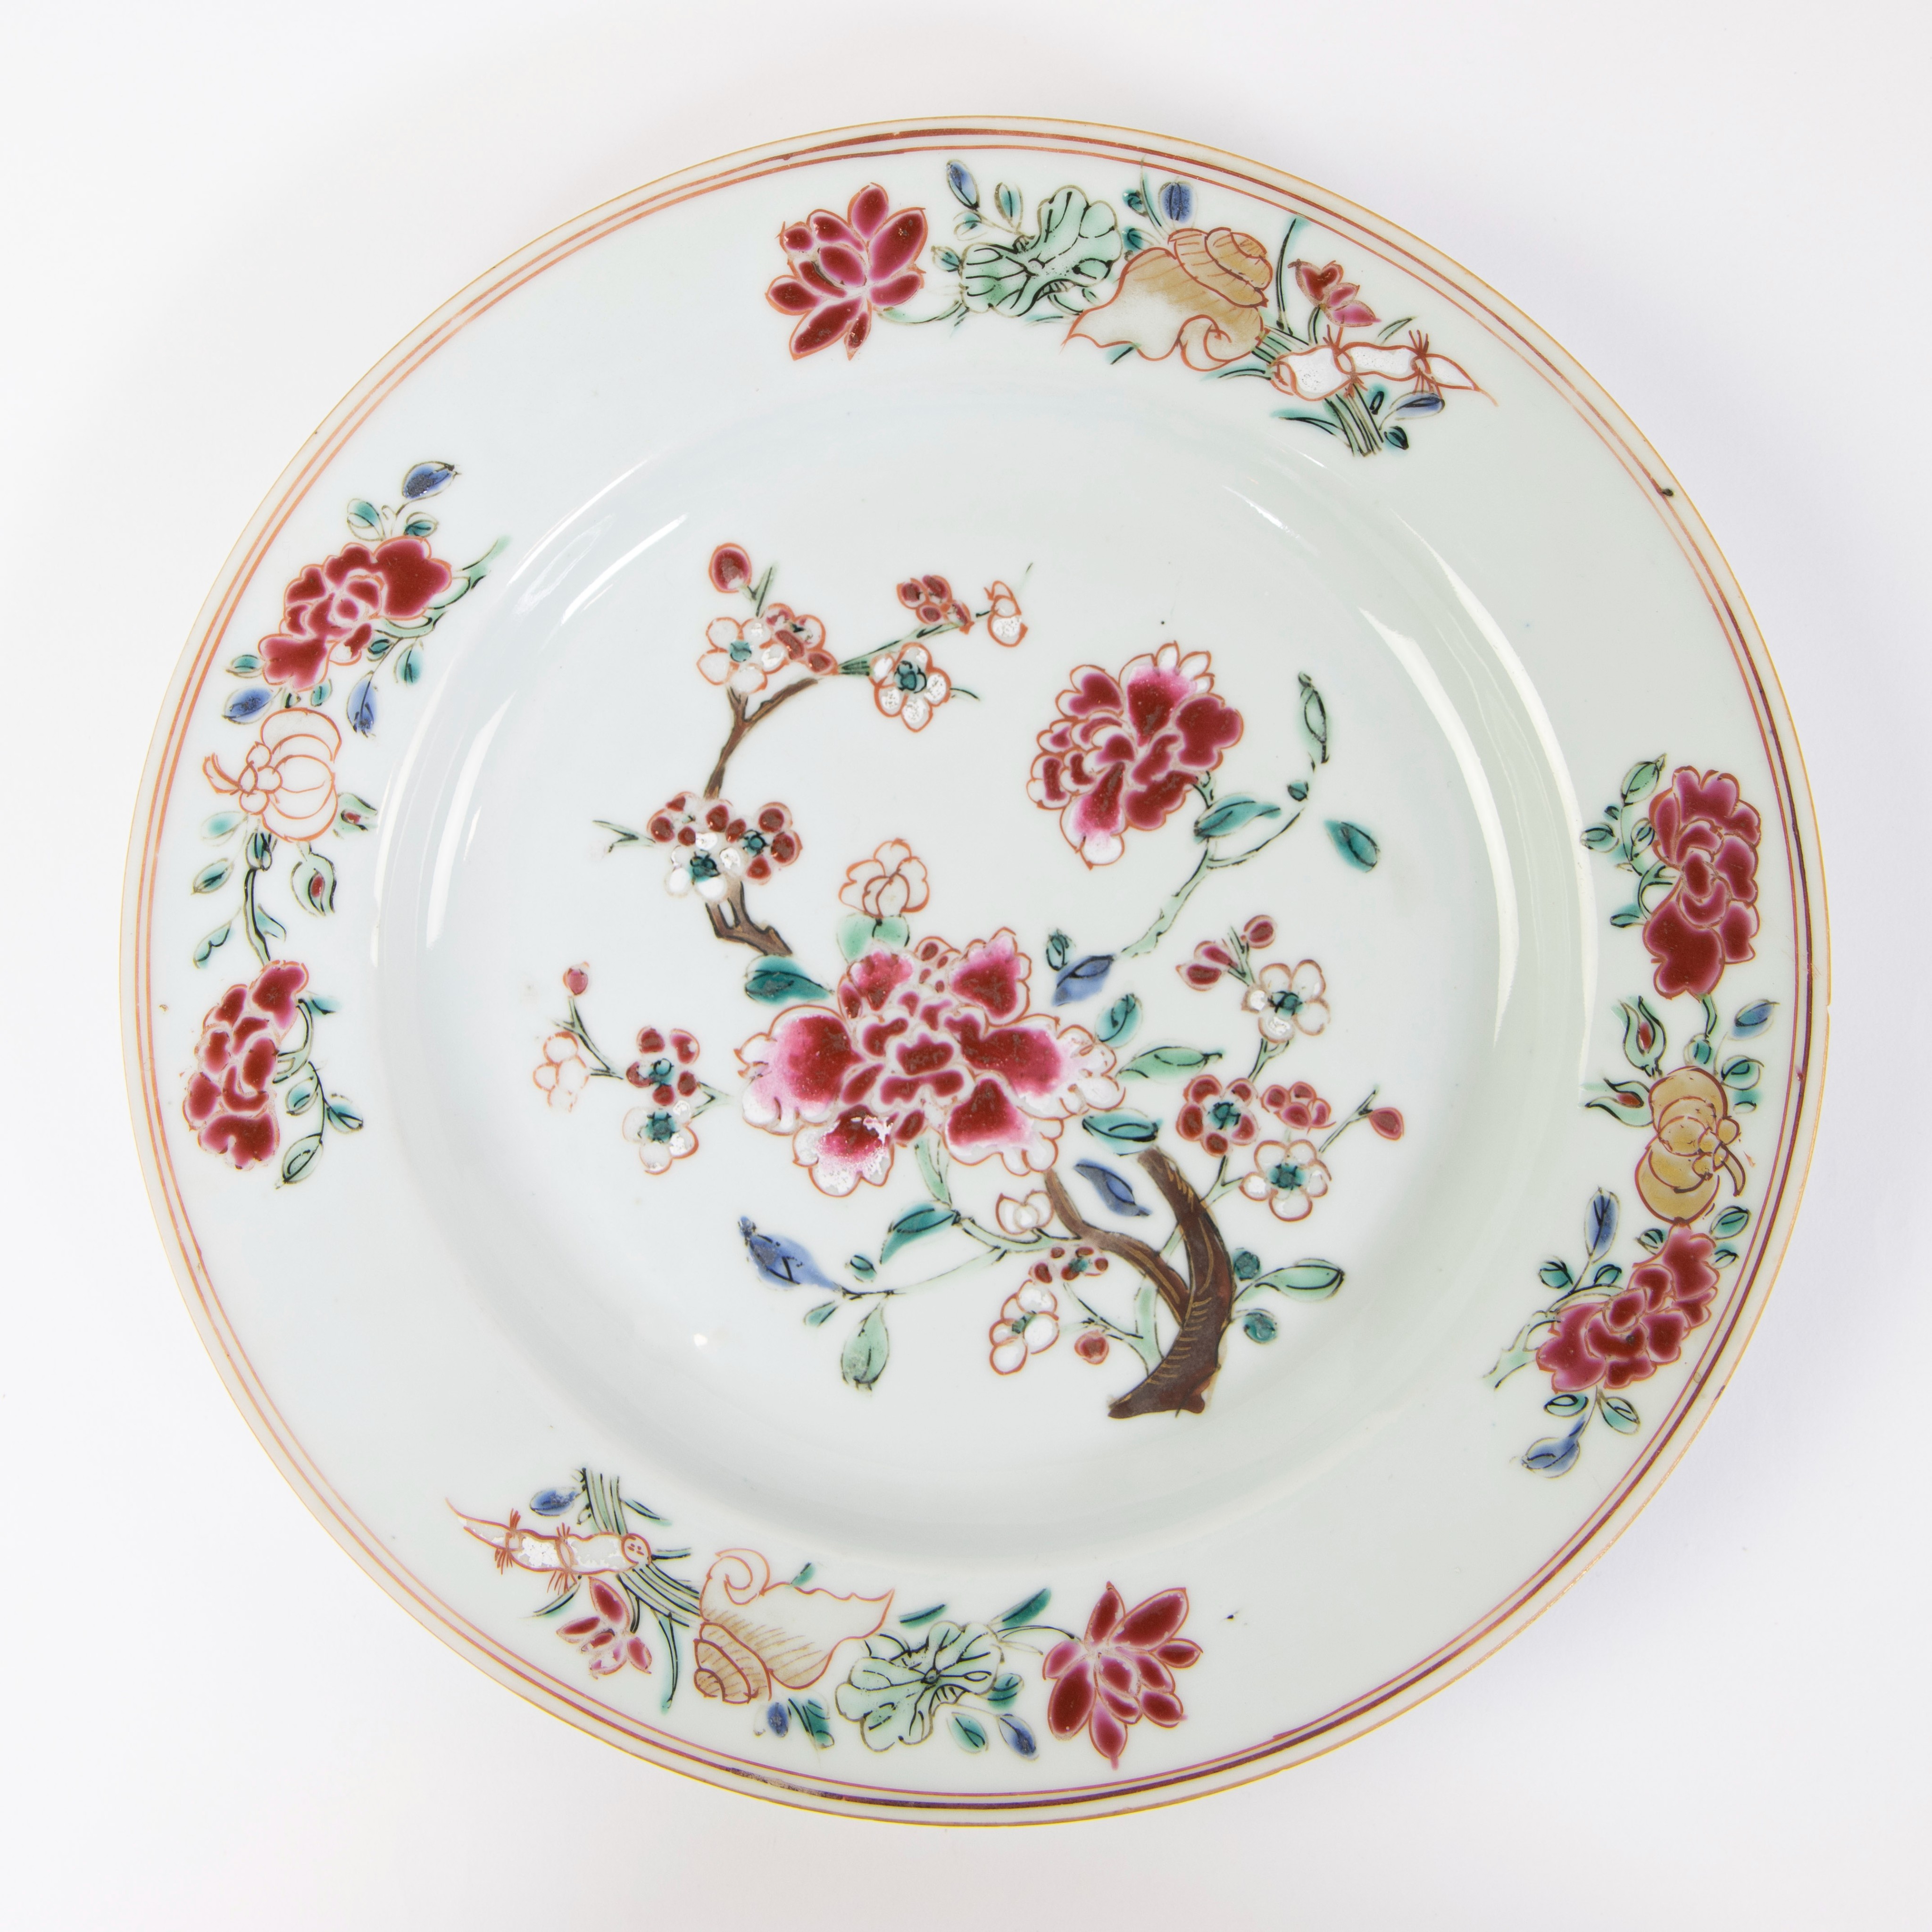 Lot of 5 Chinese famille rose plates, 18th century - Image 16 of 18